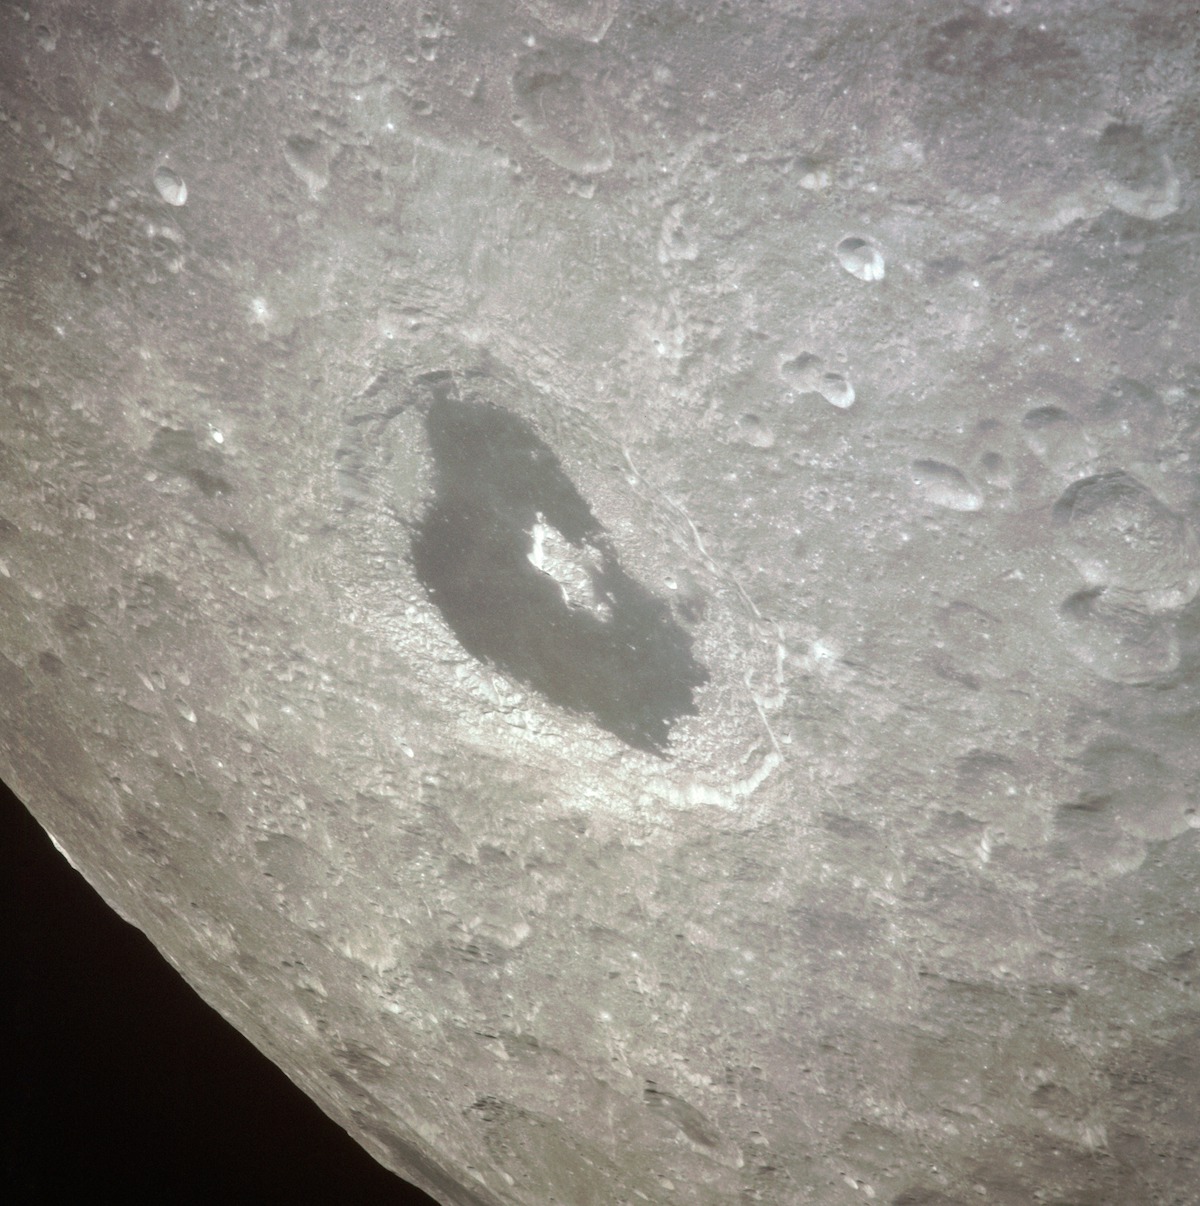 large lunar crater filled with dark, solidified lava